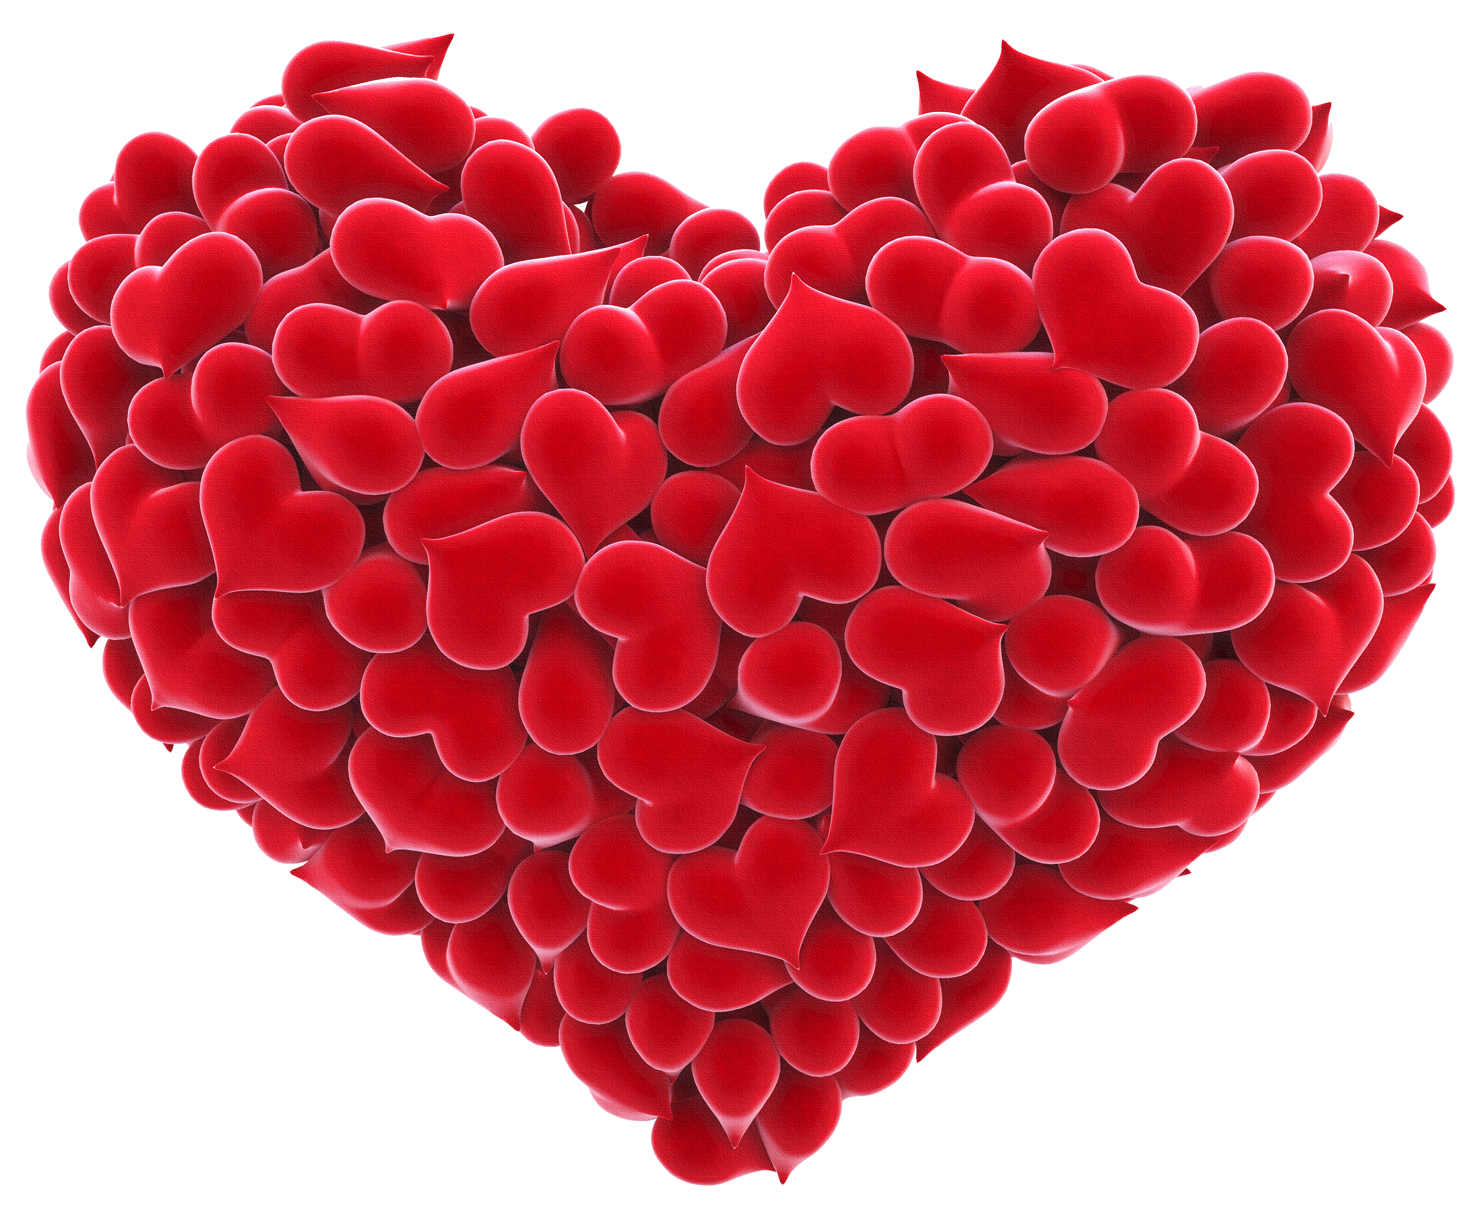 https://gallery.yopriceville.com/var/albums/Free-Clipart-Pictures/Hearts-PNG/Red_Heart_of_Hearts_PNG_Clipart.png?m=1434276671